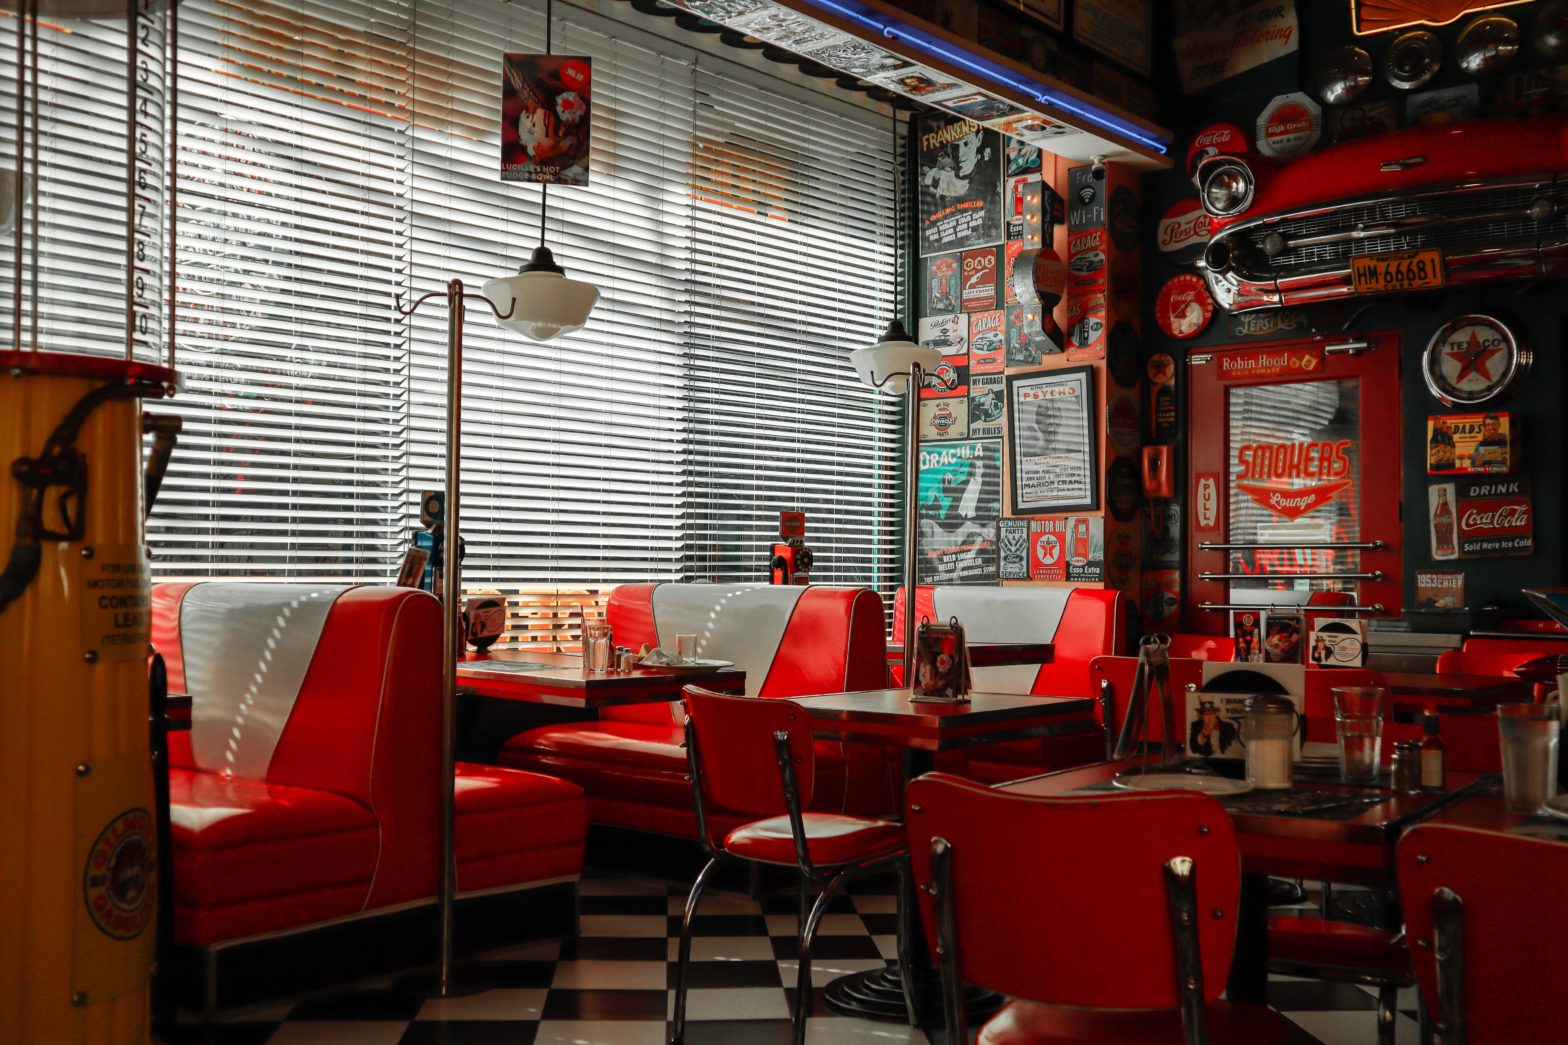 Time Out Reports A "Karen" Diner Will Soon Be Opening In NYC